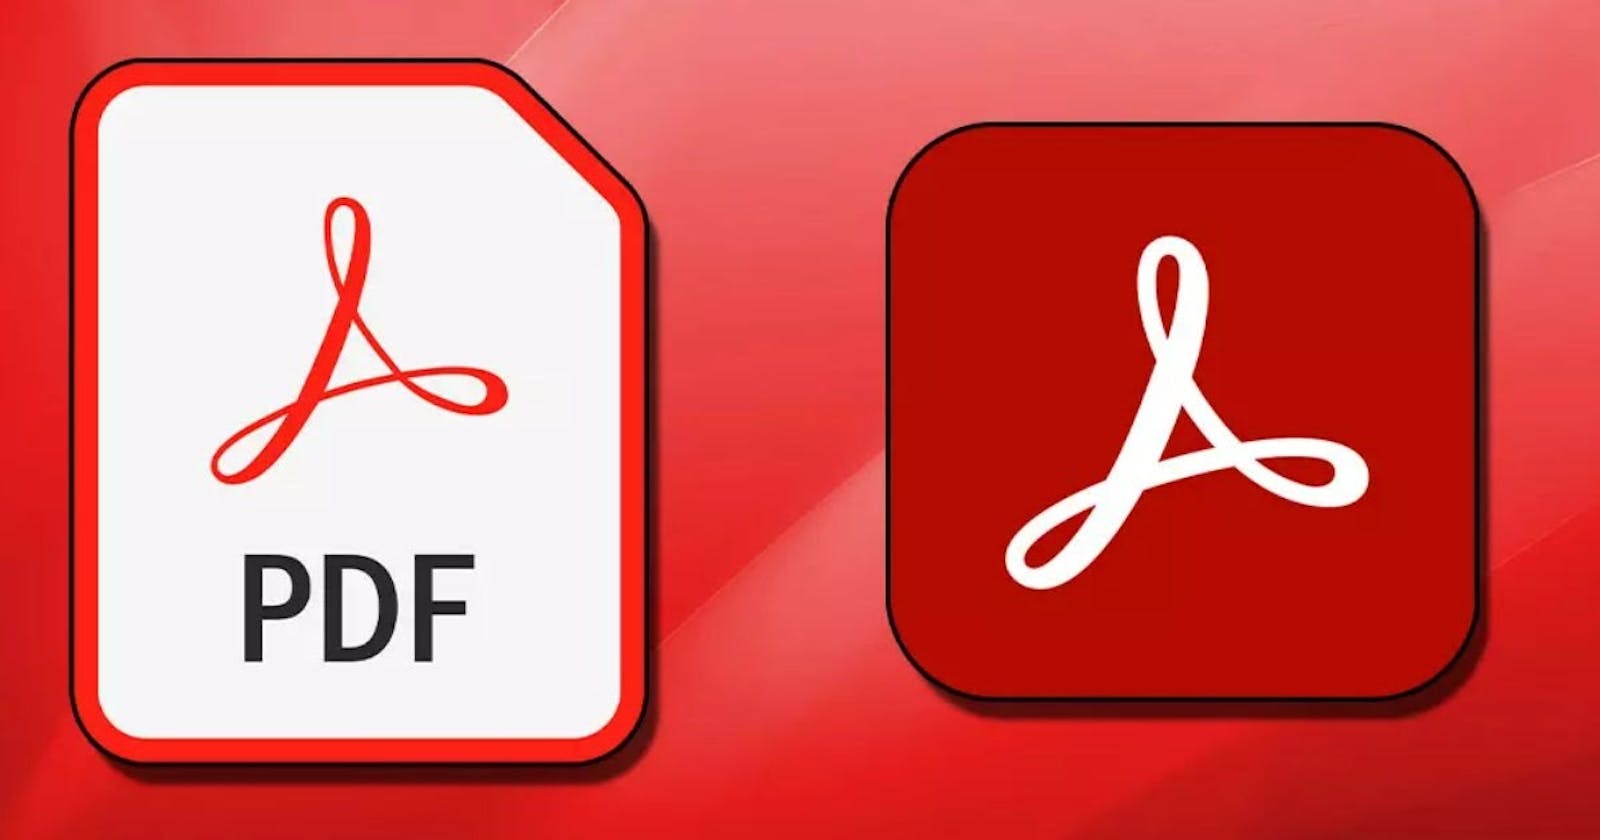 How to Merge Two PDFs Using Adobe Acrobat